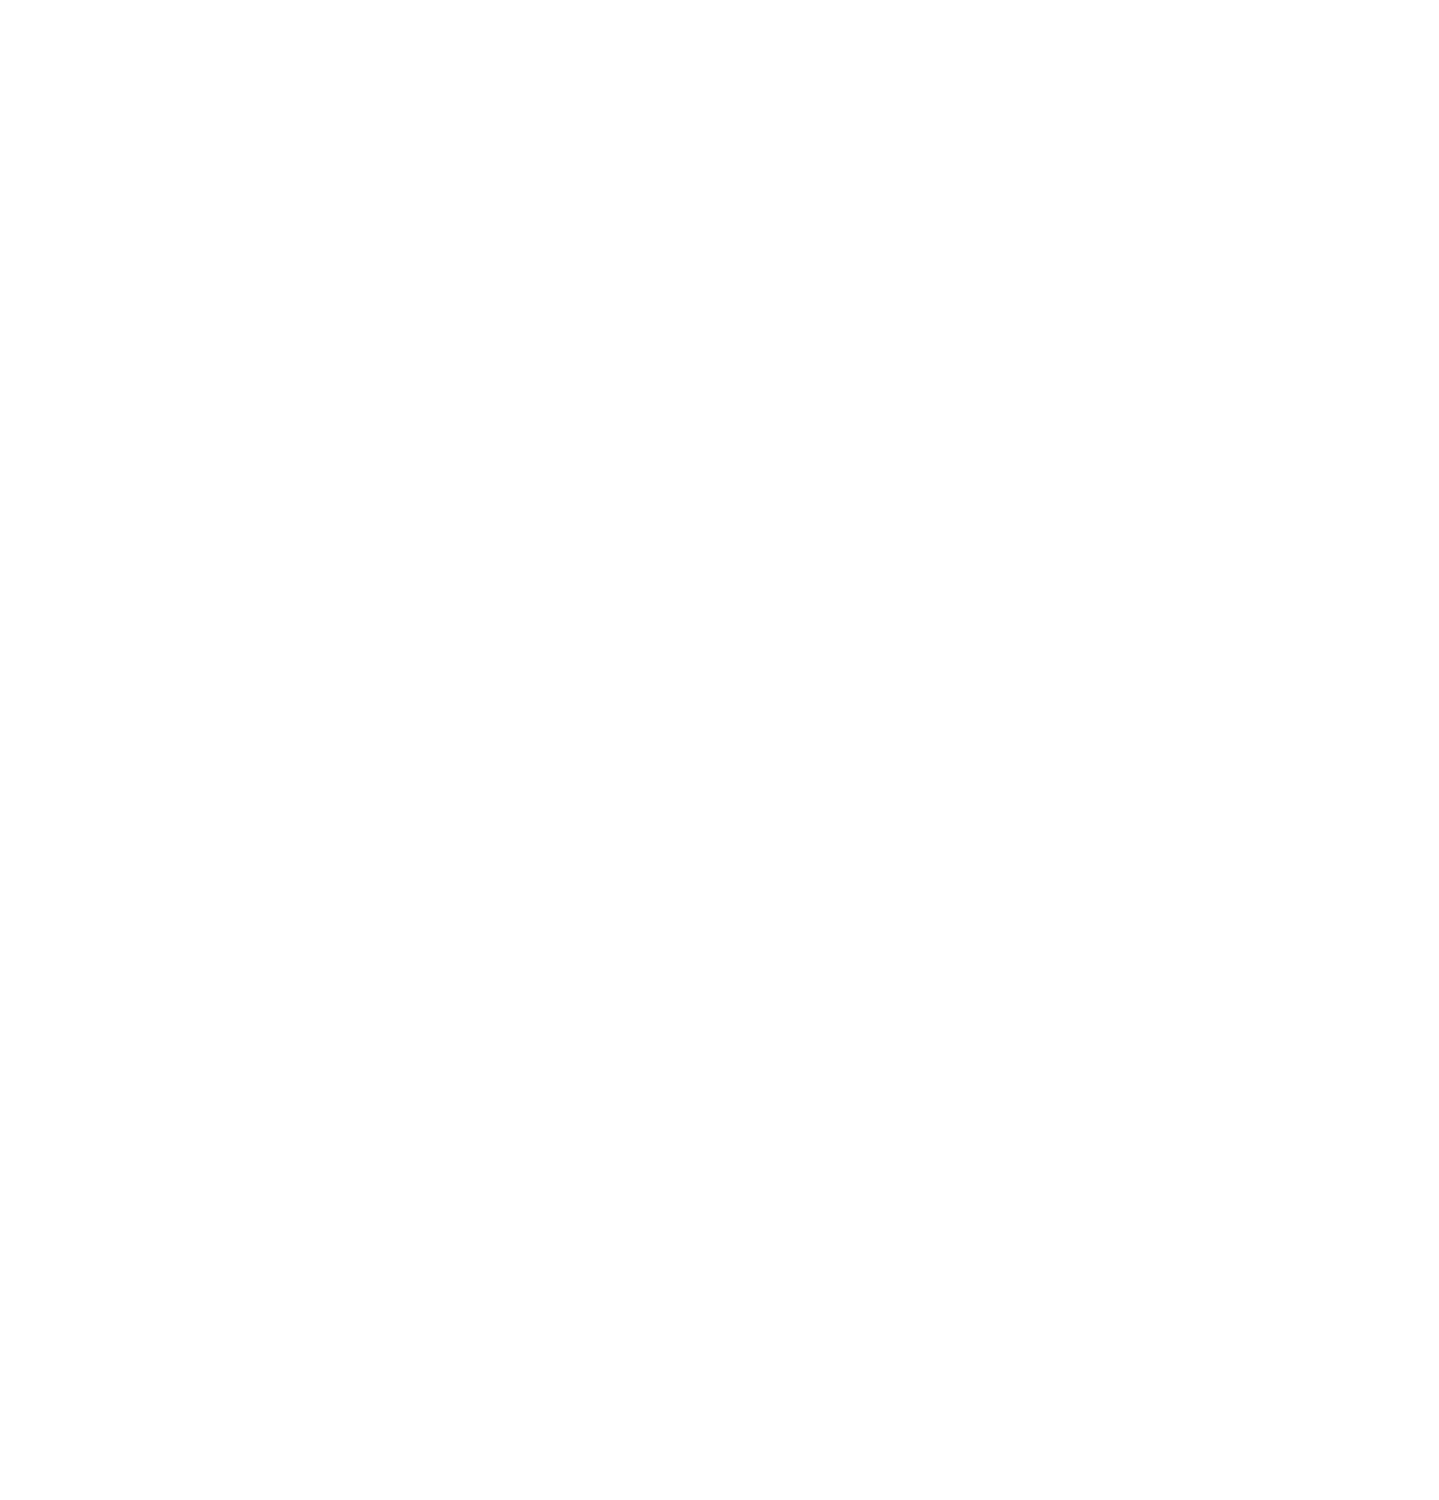 Anglo American logo in transparent PNG and vectorized SVG formats